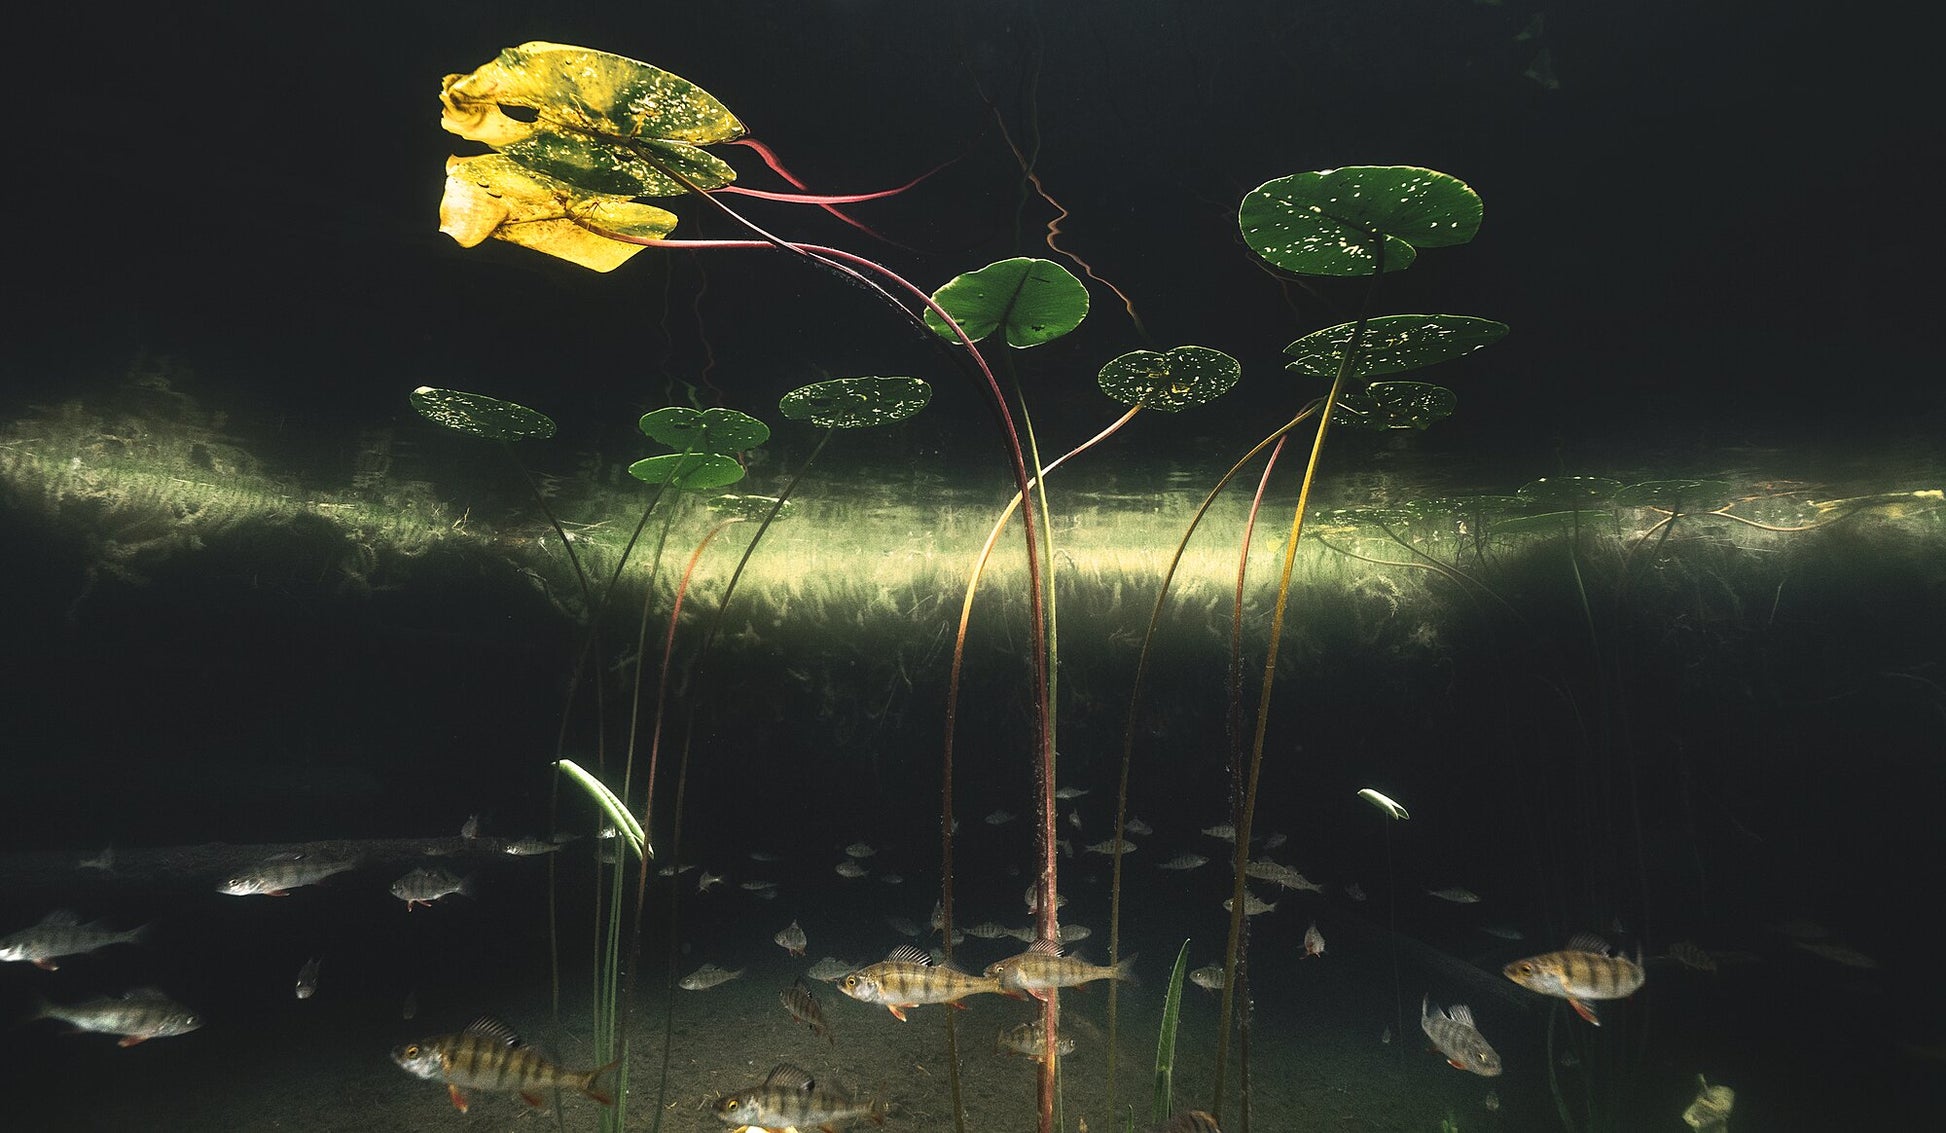 Underwater photo of school of perch swimming beneath water lilies in lake.